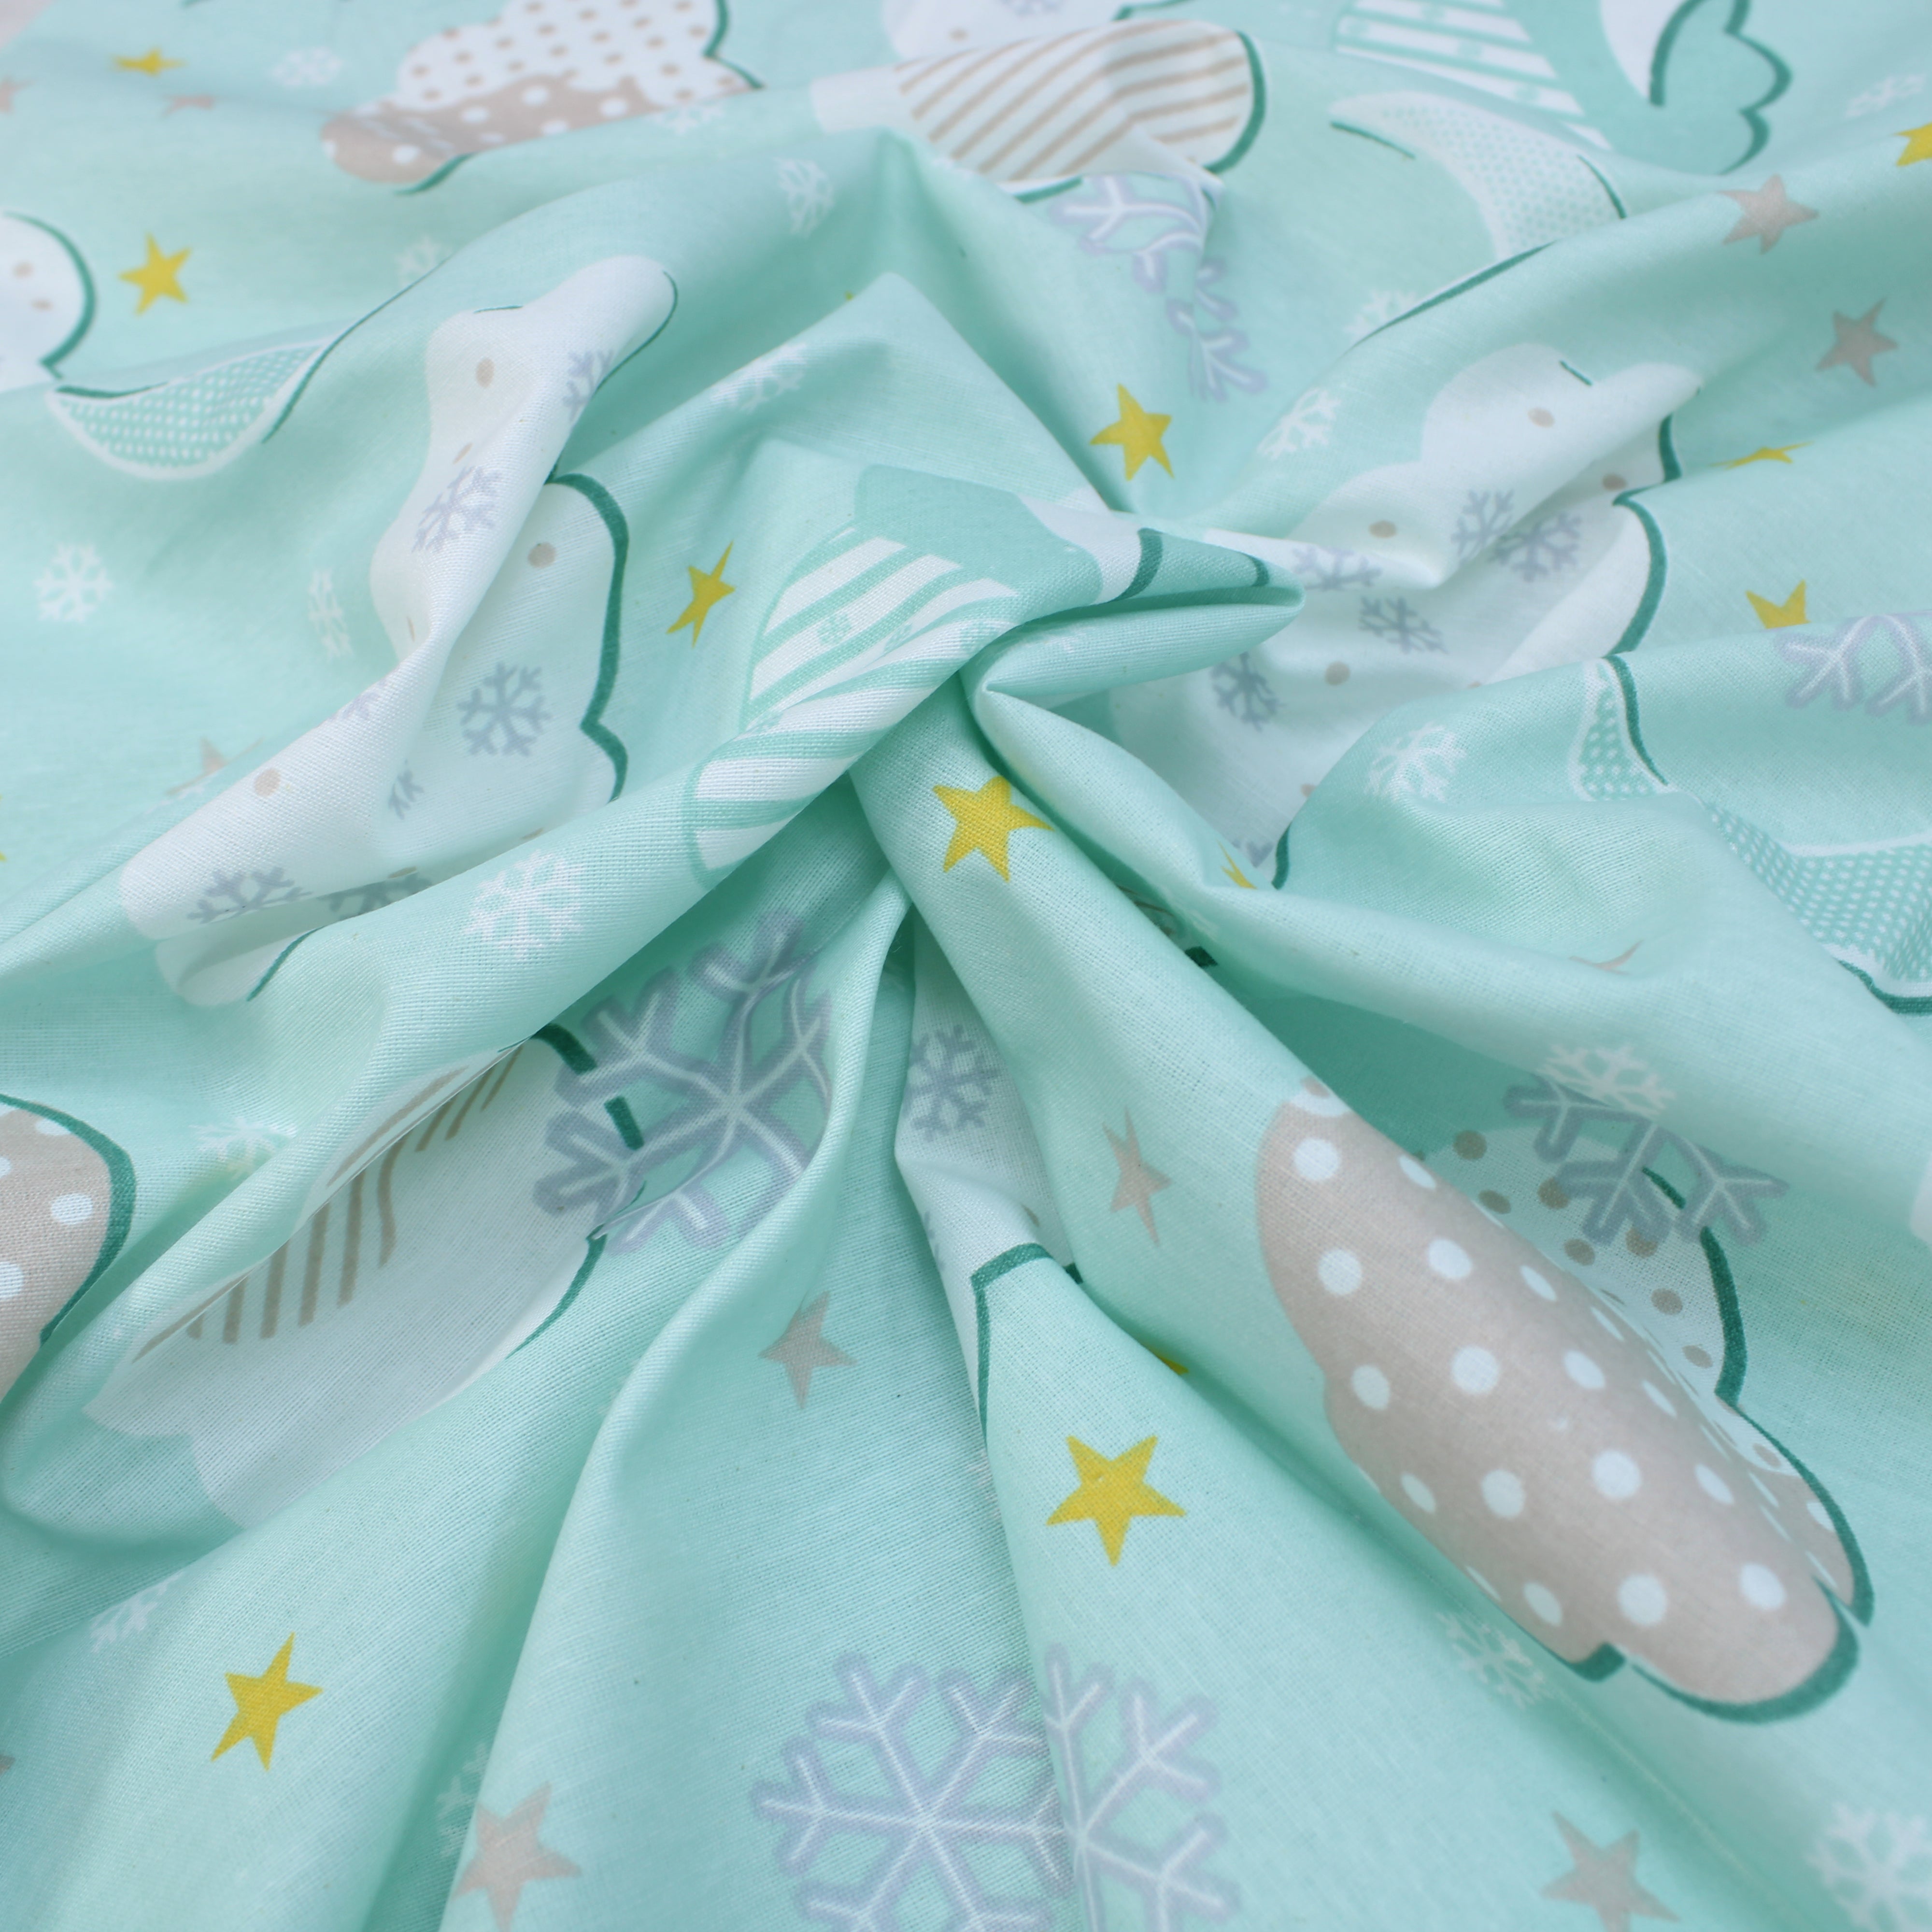 Premium Quality Super Wide Cotton Blend Sheeting, 'Stars In The Clouds', 94" Wide - Mint